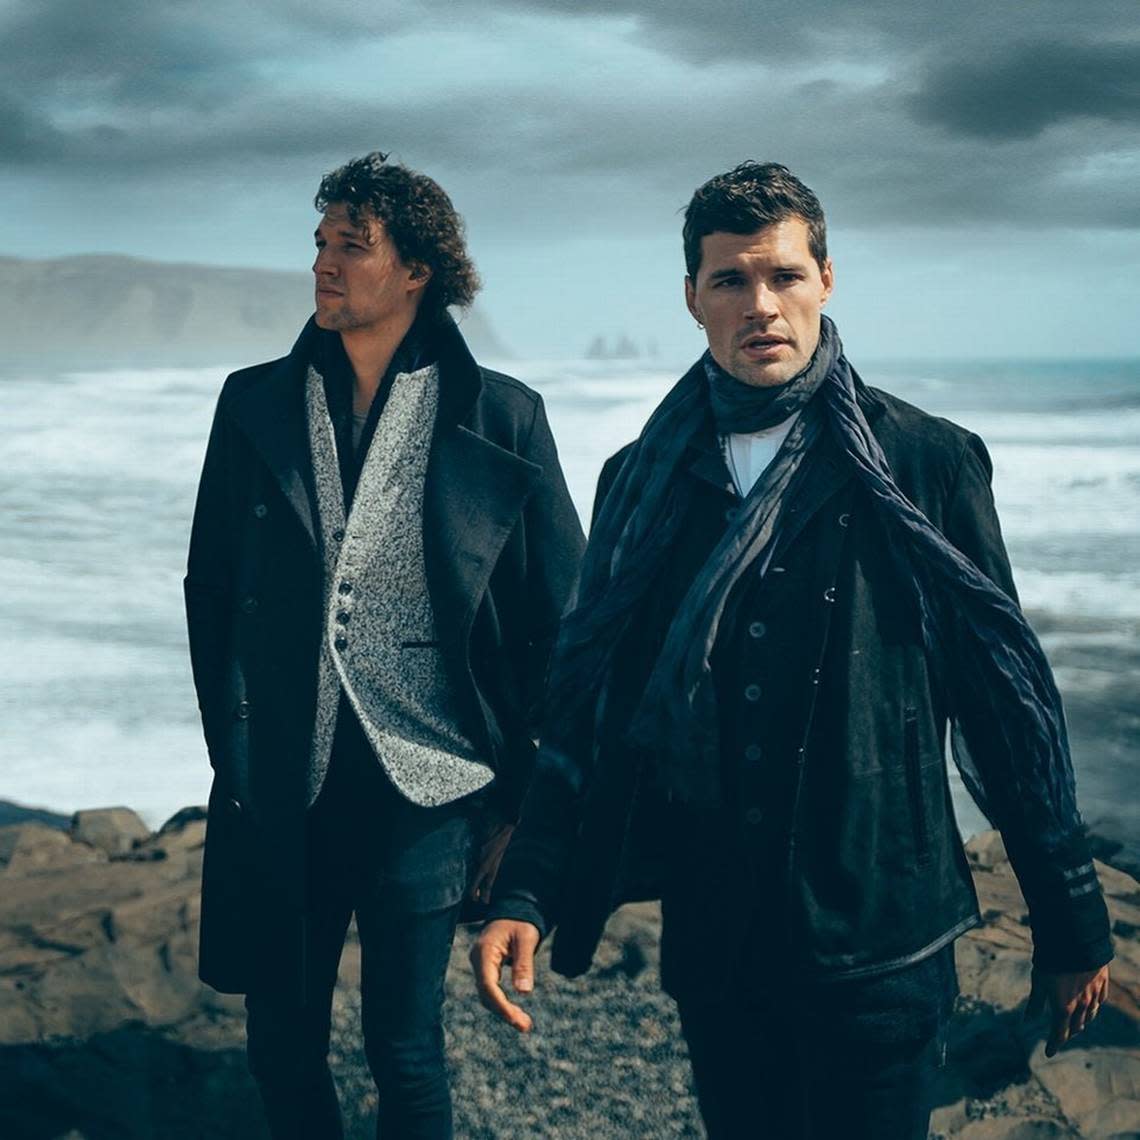 Christian pop duo For King & Country is scheduled to perform Nov. 26 at the T-Mobile Center.